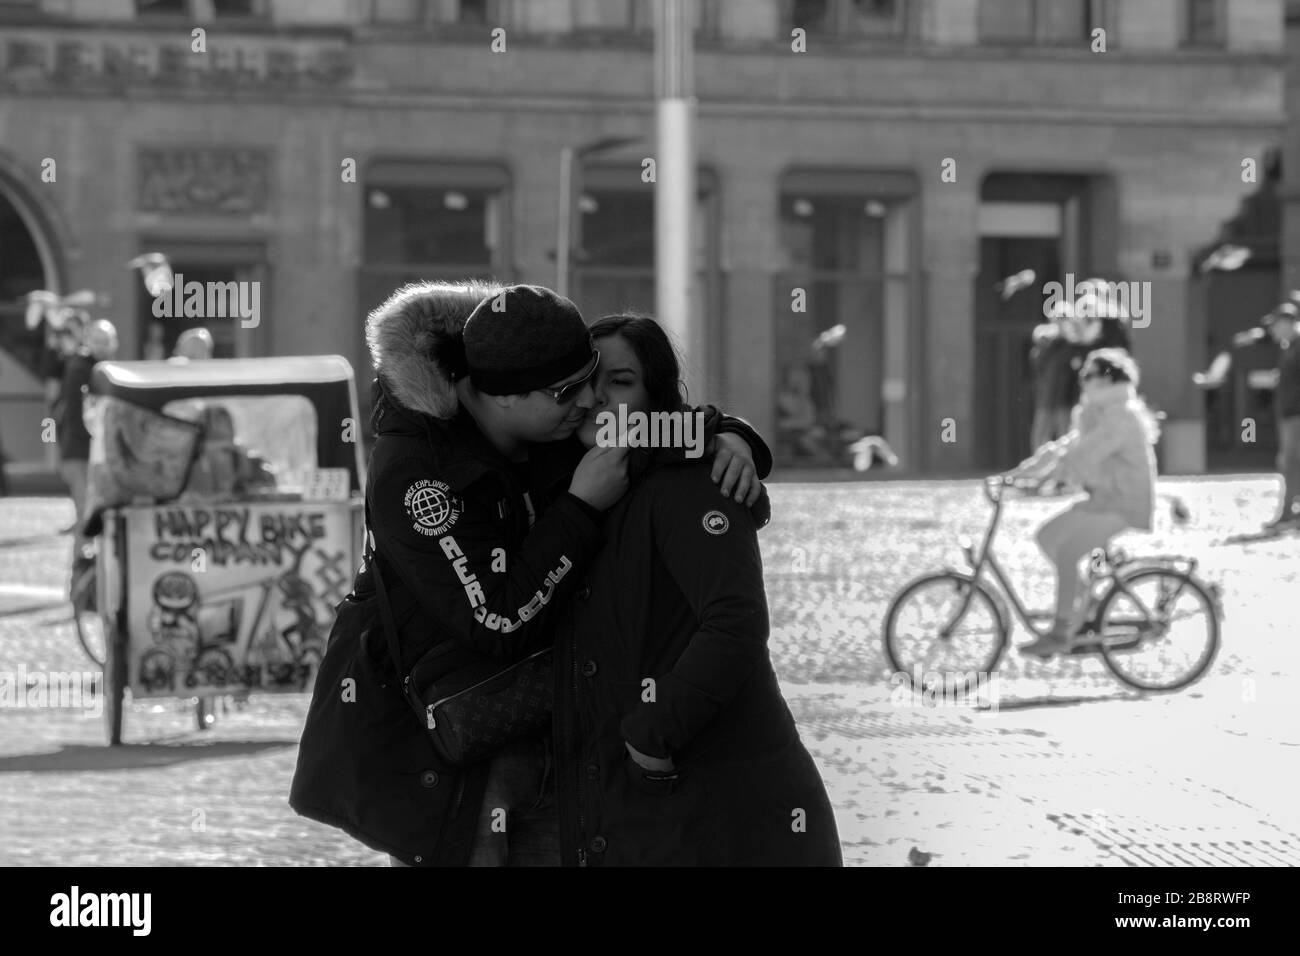 Is Kissing Safe During The Coronavirus Outbreak At Amsterdam The Netherlands 2020 In Black And White Stock Photo